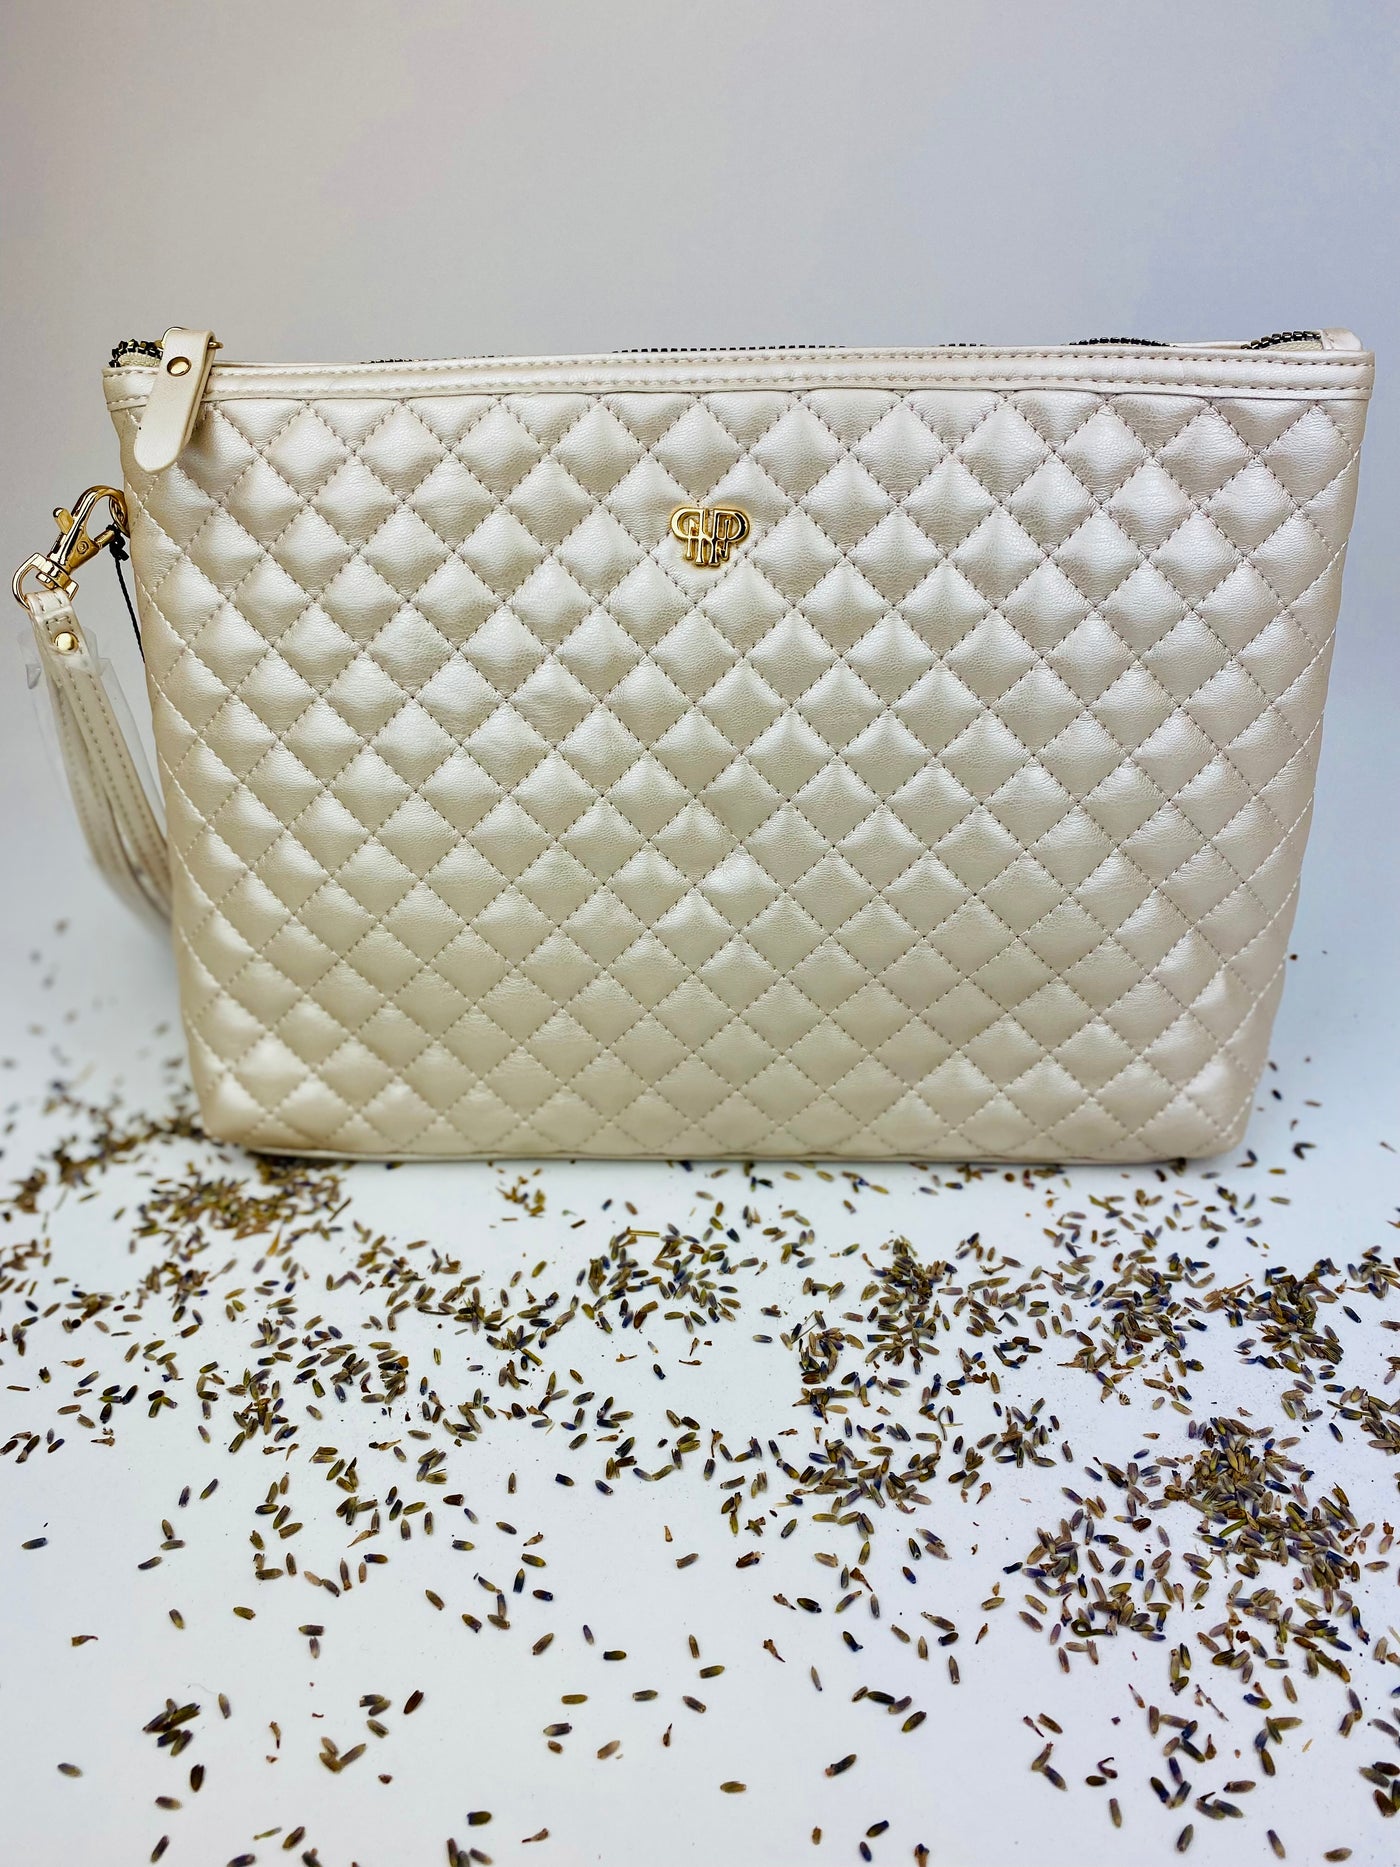 Travel in Style! Gorgeous quilted pearl travel pieces perfect for the girl on the go!